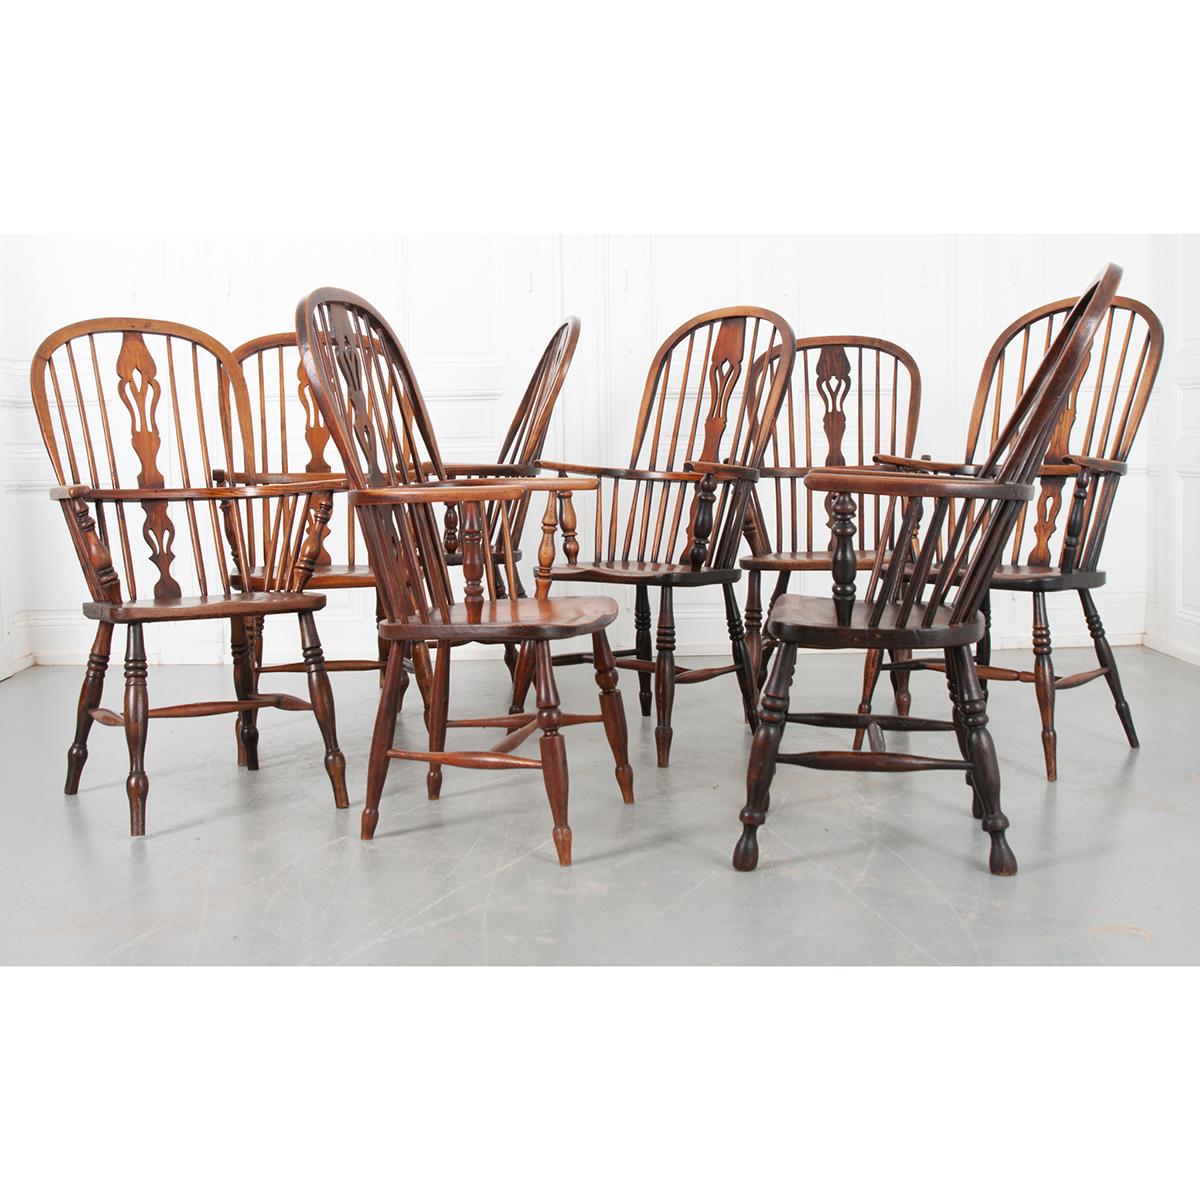 A wonderful set of eight English solid oak Windsor chairs have been cleaned, tightened, and polished. They are very sturdy resting on four turned legs with ‘H’ stretchers and comfortable. Each one is slightly different making a fine set. They would